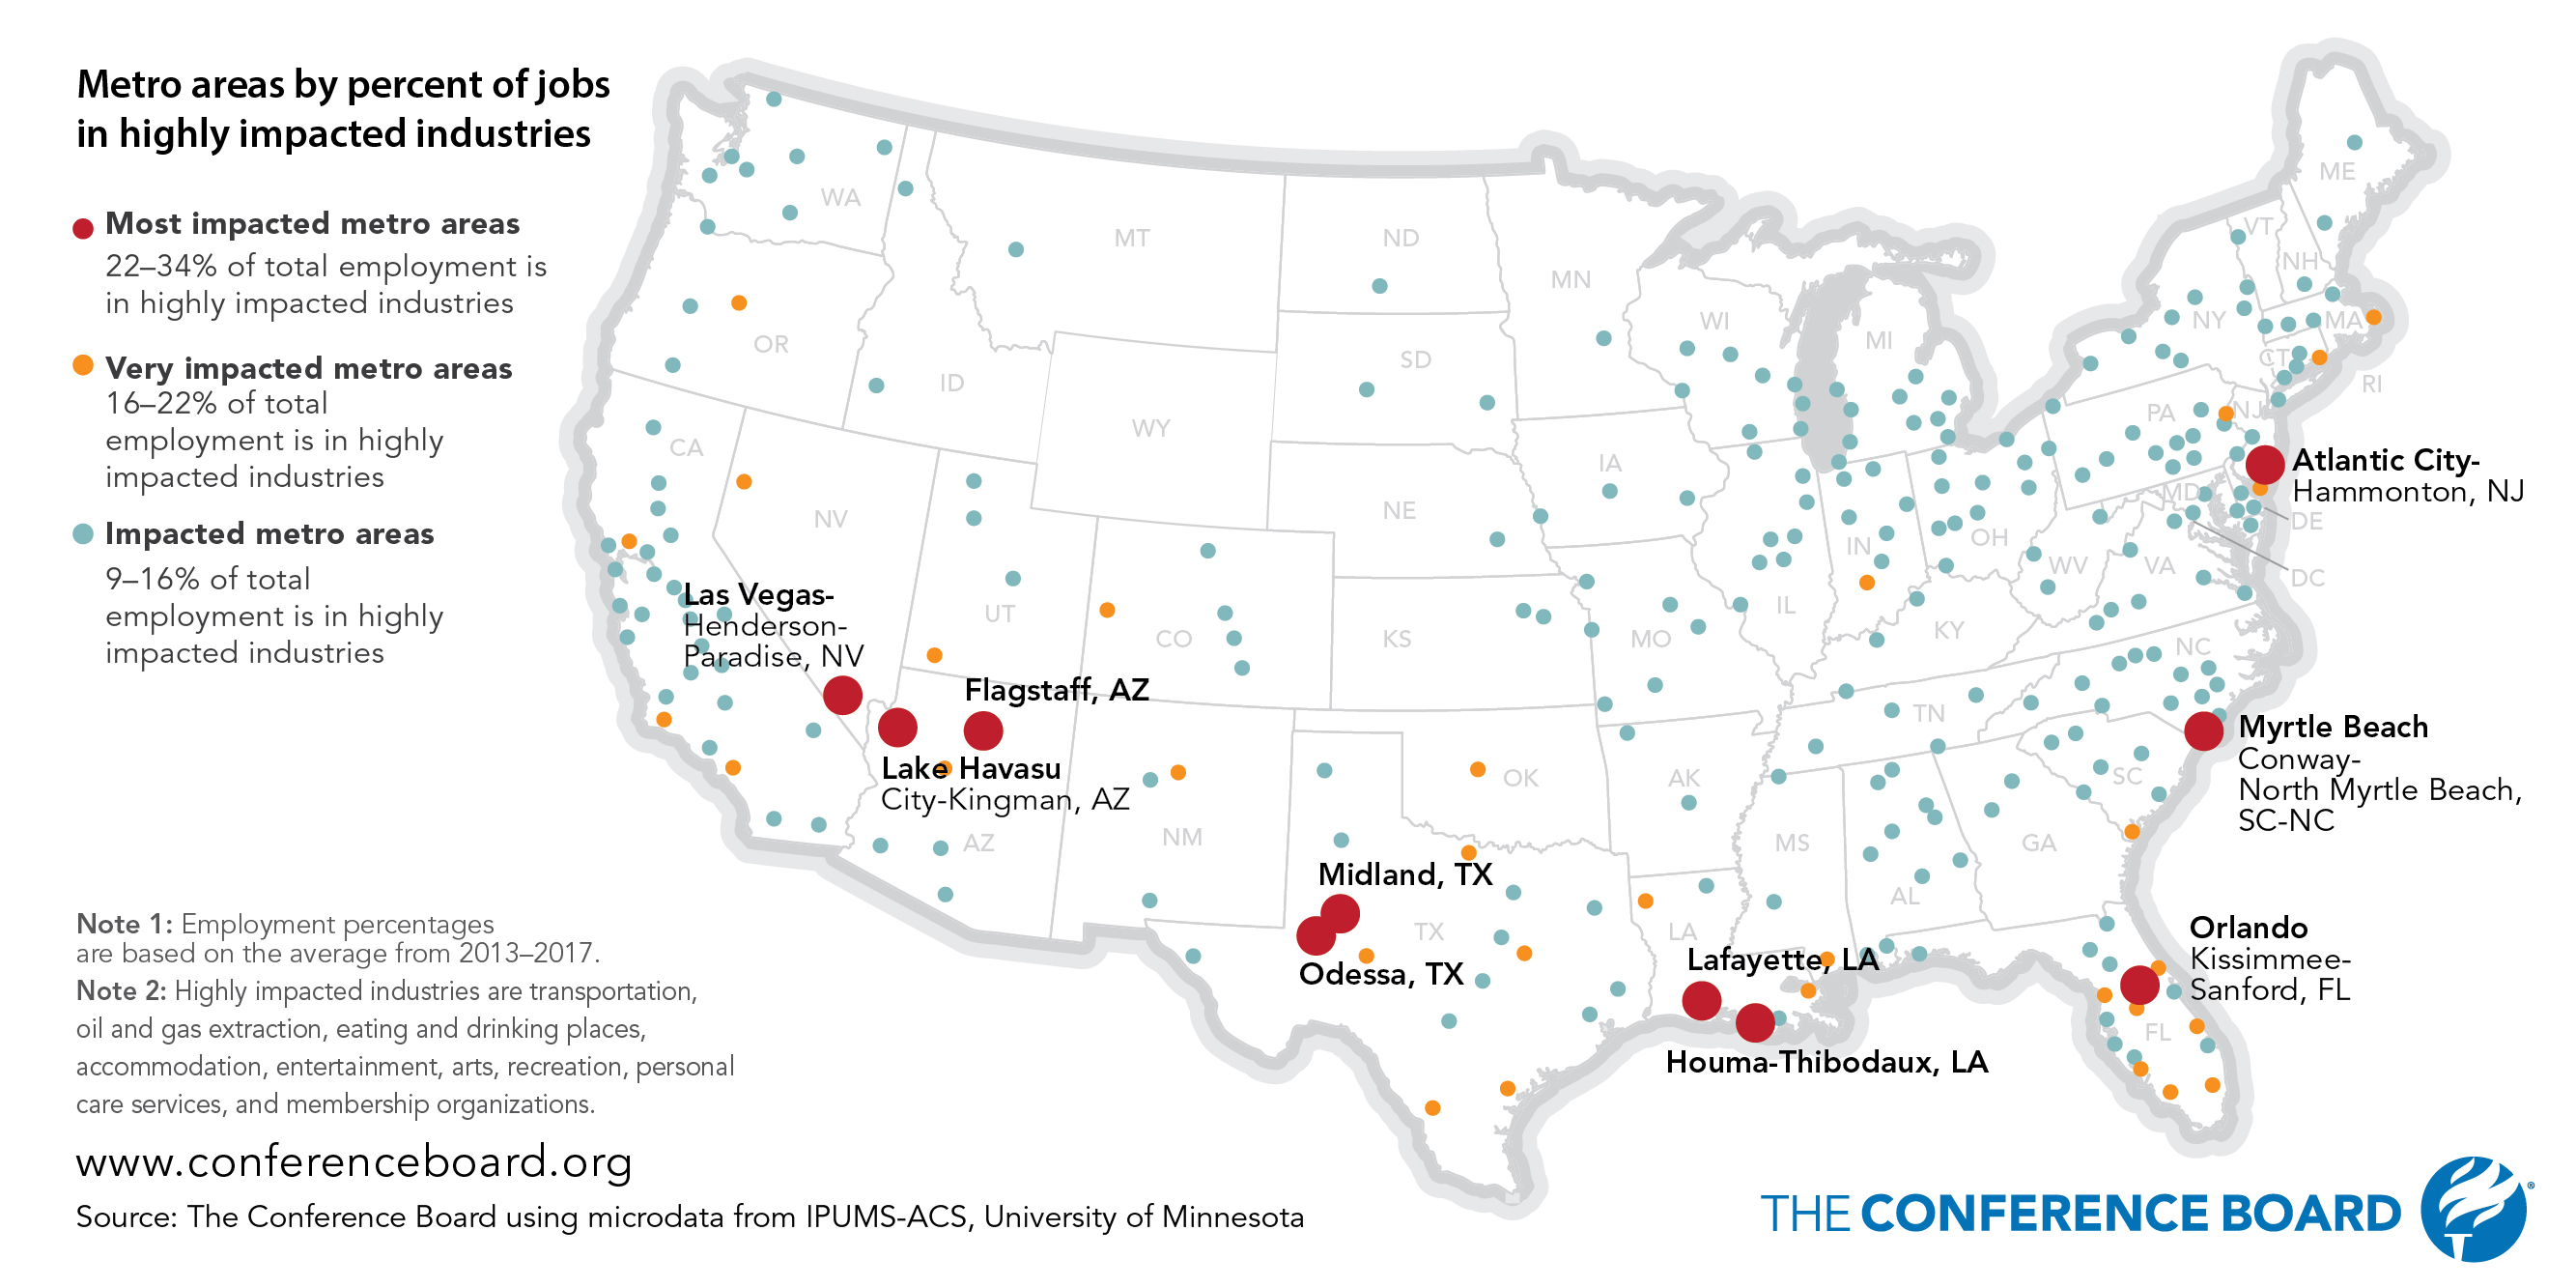 COVID-19: Metro areas at high risk of losing jobs